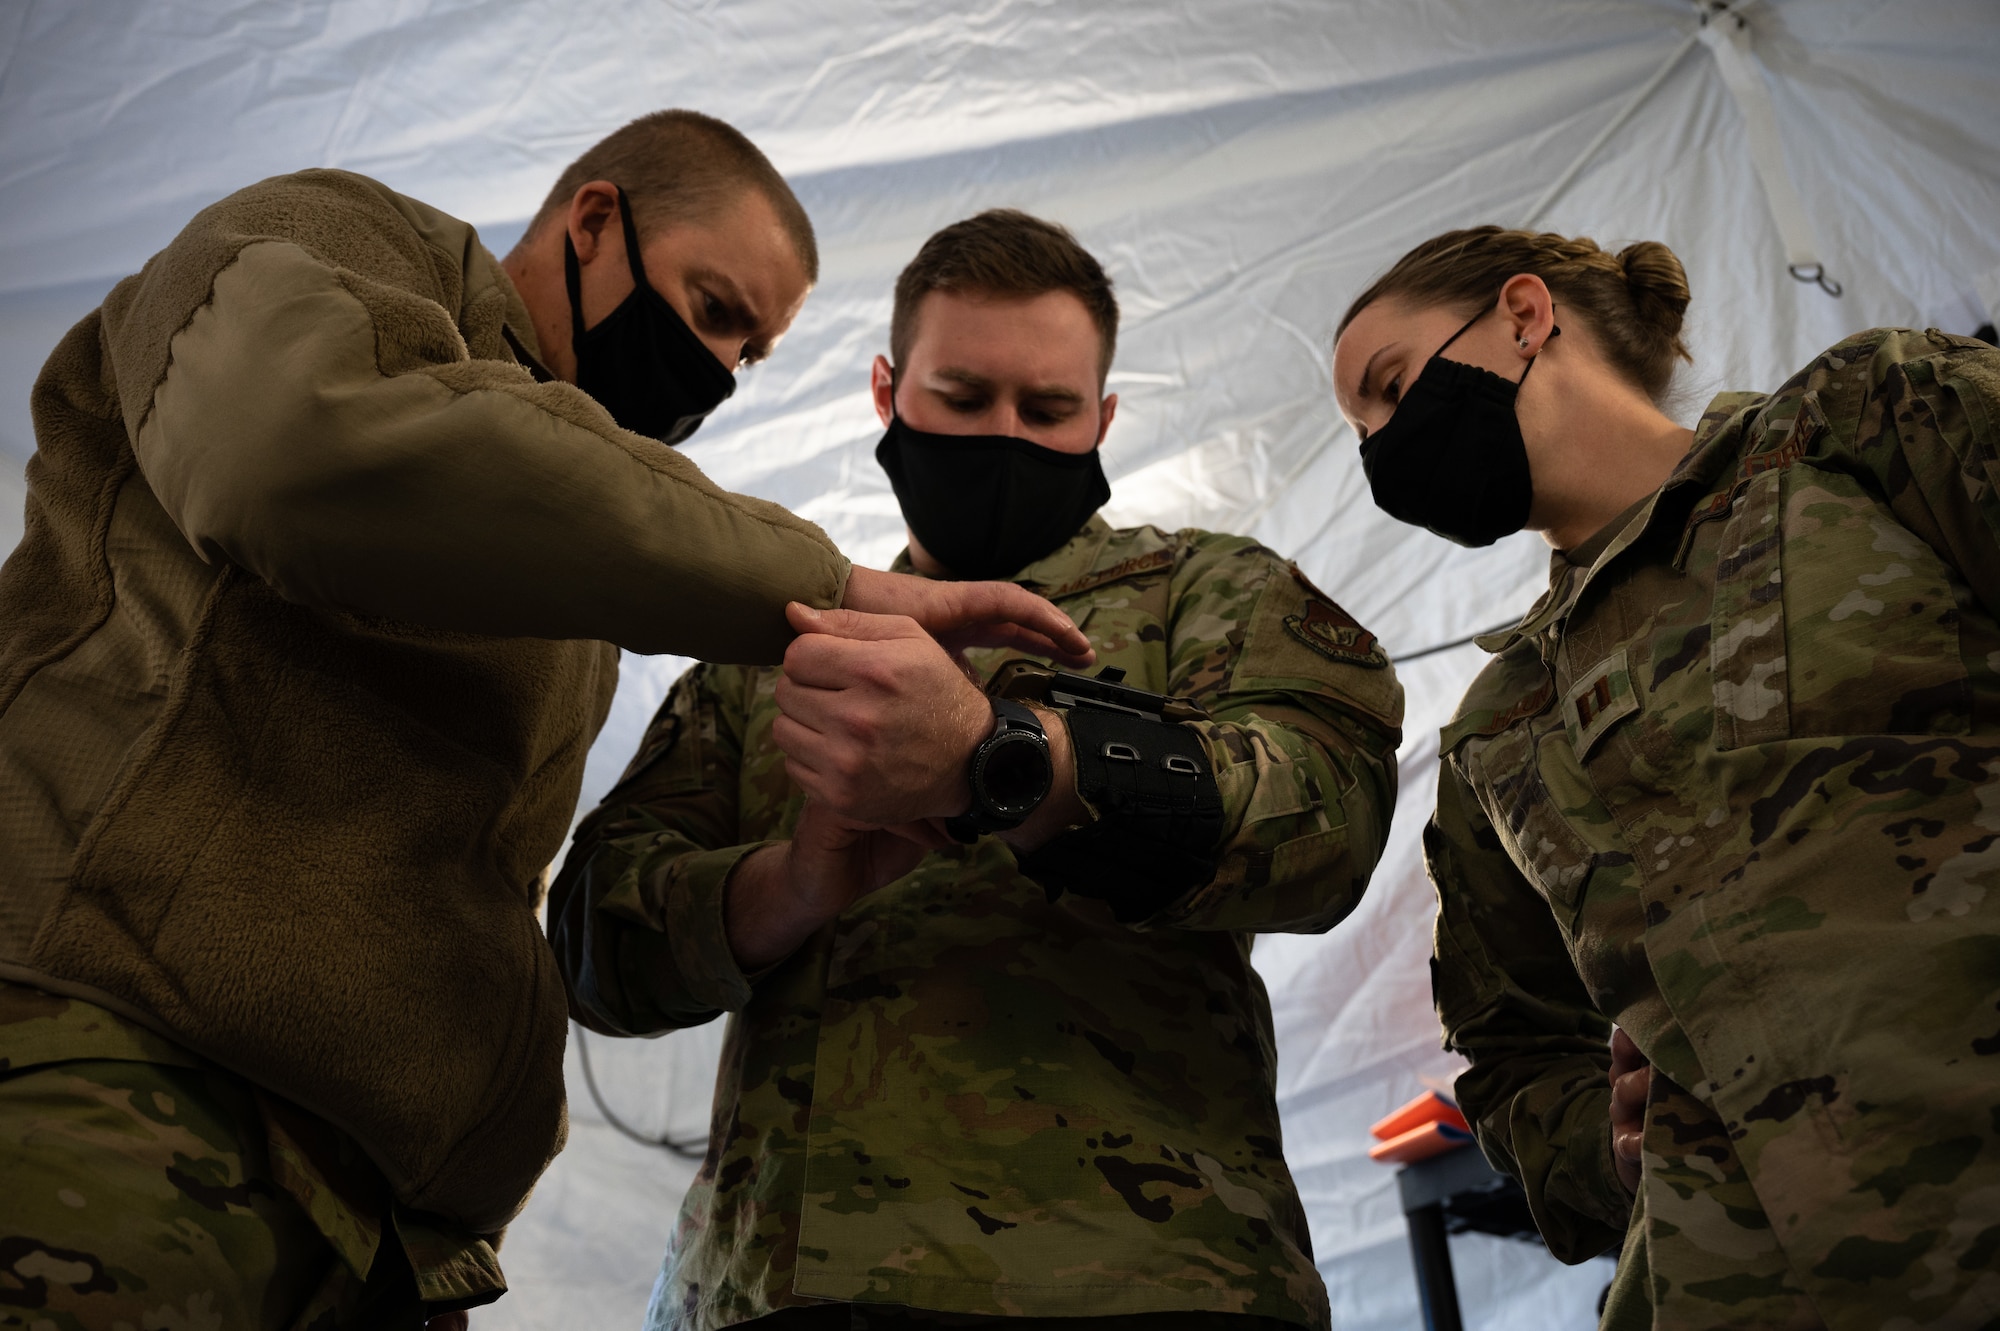 U.S. Airmen assigned to the 354th and 673rd Medical Group participate in a Capabilities-Based Assessment (CBA) at the Yukon Training Area, Sept. 14, 2021.